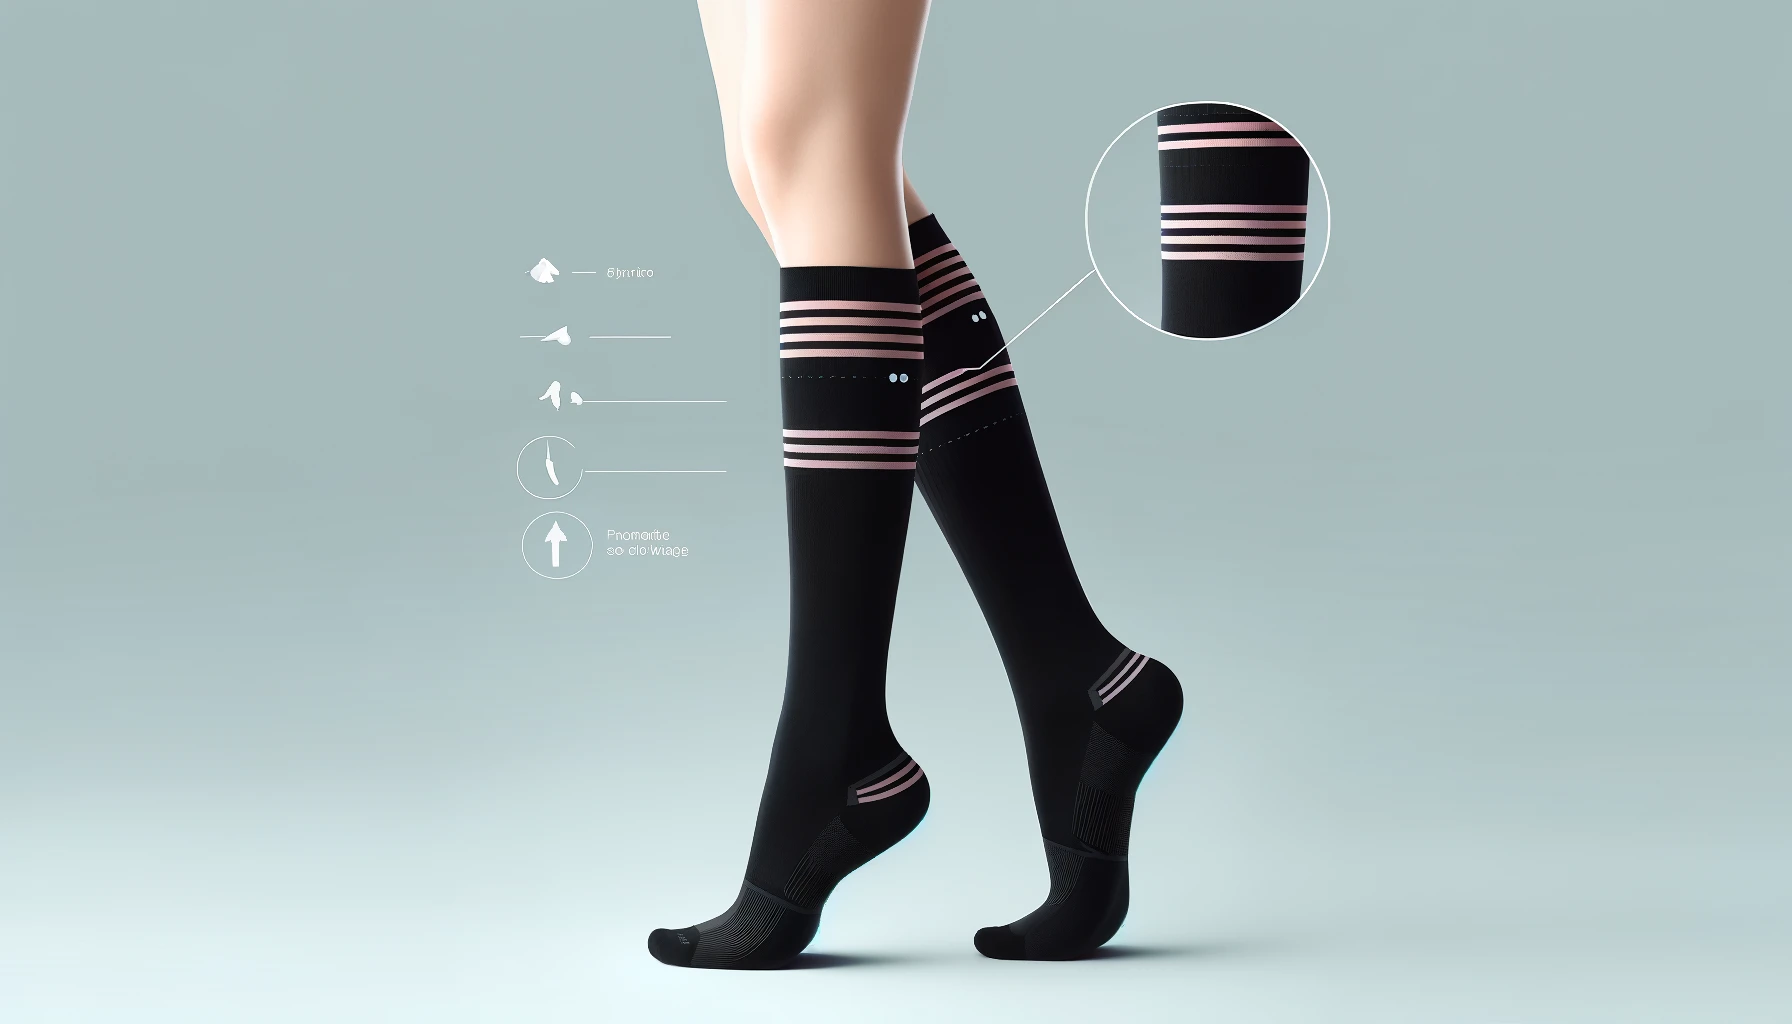 Create an image of specialized compression socks for women, exhibiting a snug fit on the lower legs, accentuating the calf, ankle, and foot. The socks should be elegant black with three distinctive, soft pink horizontal stripes on the upper section, symbolizing the compression zone. The socks are to be worn on a woman's legs, poised delicately to emphasize the shape and the compression feature of the socks. Visual indicators such as arrows should be present, signifying the function of promoting better blood flow. The background should remain simple and subtle to keep the focus on the socks, with a 16:9 aspect ratio.